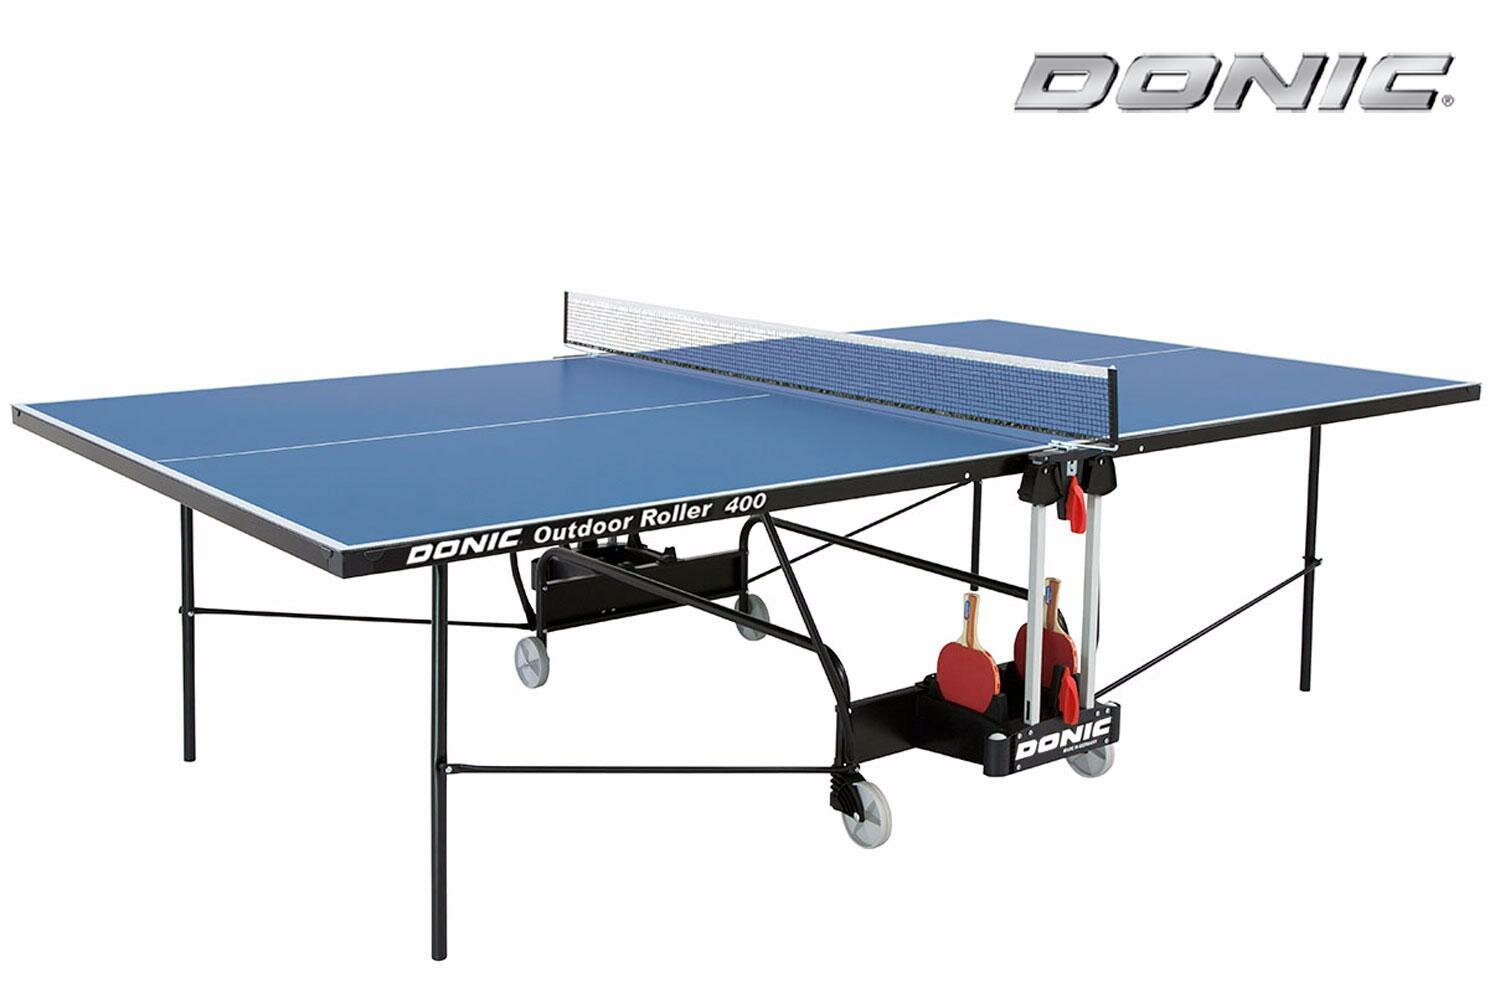   Donic Outdoor Roller 400   